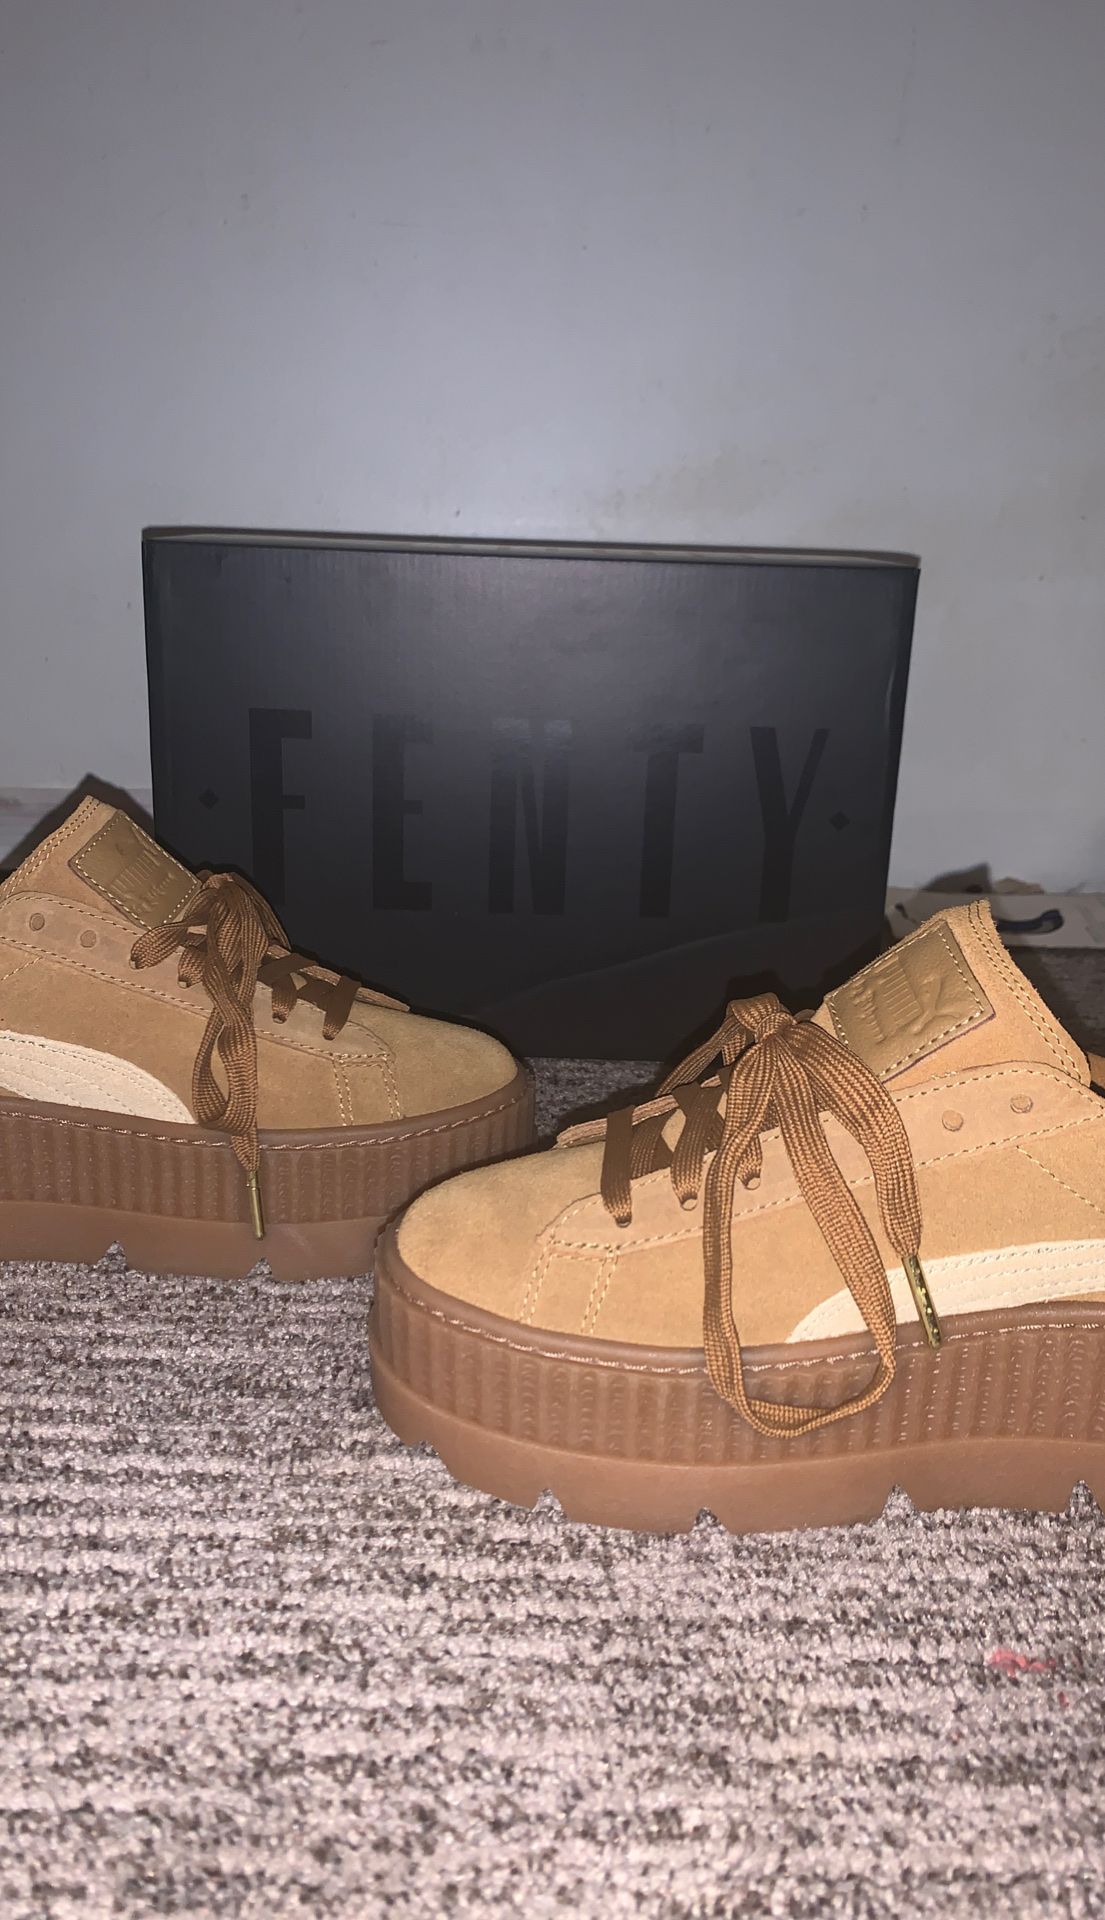 FENTY x PUMA Cleated Creepers 'Golden Brown' *RARE*